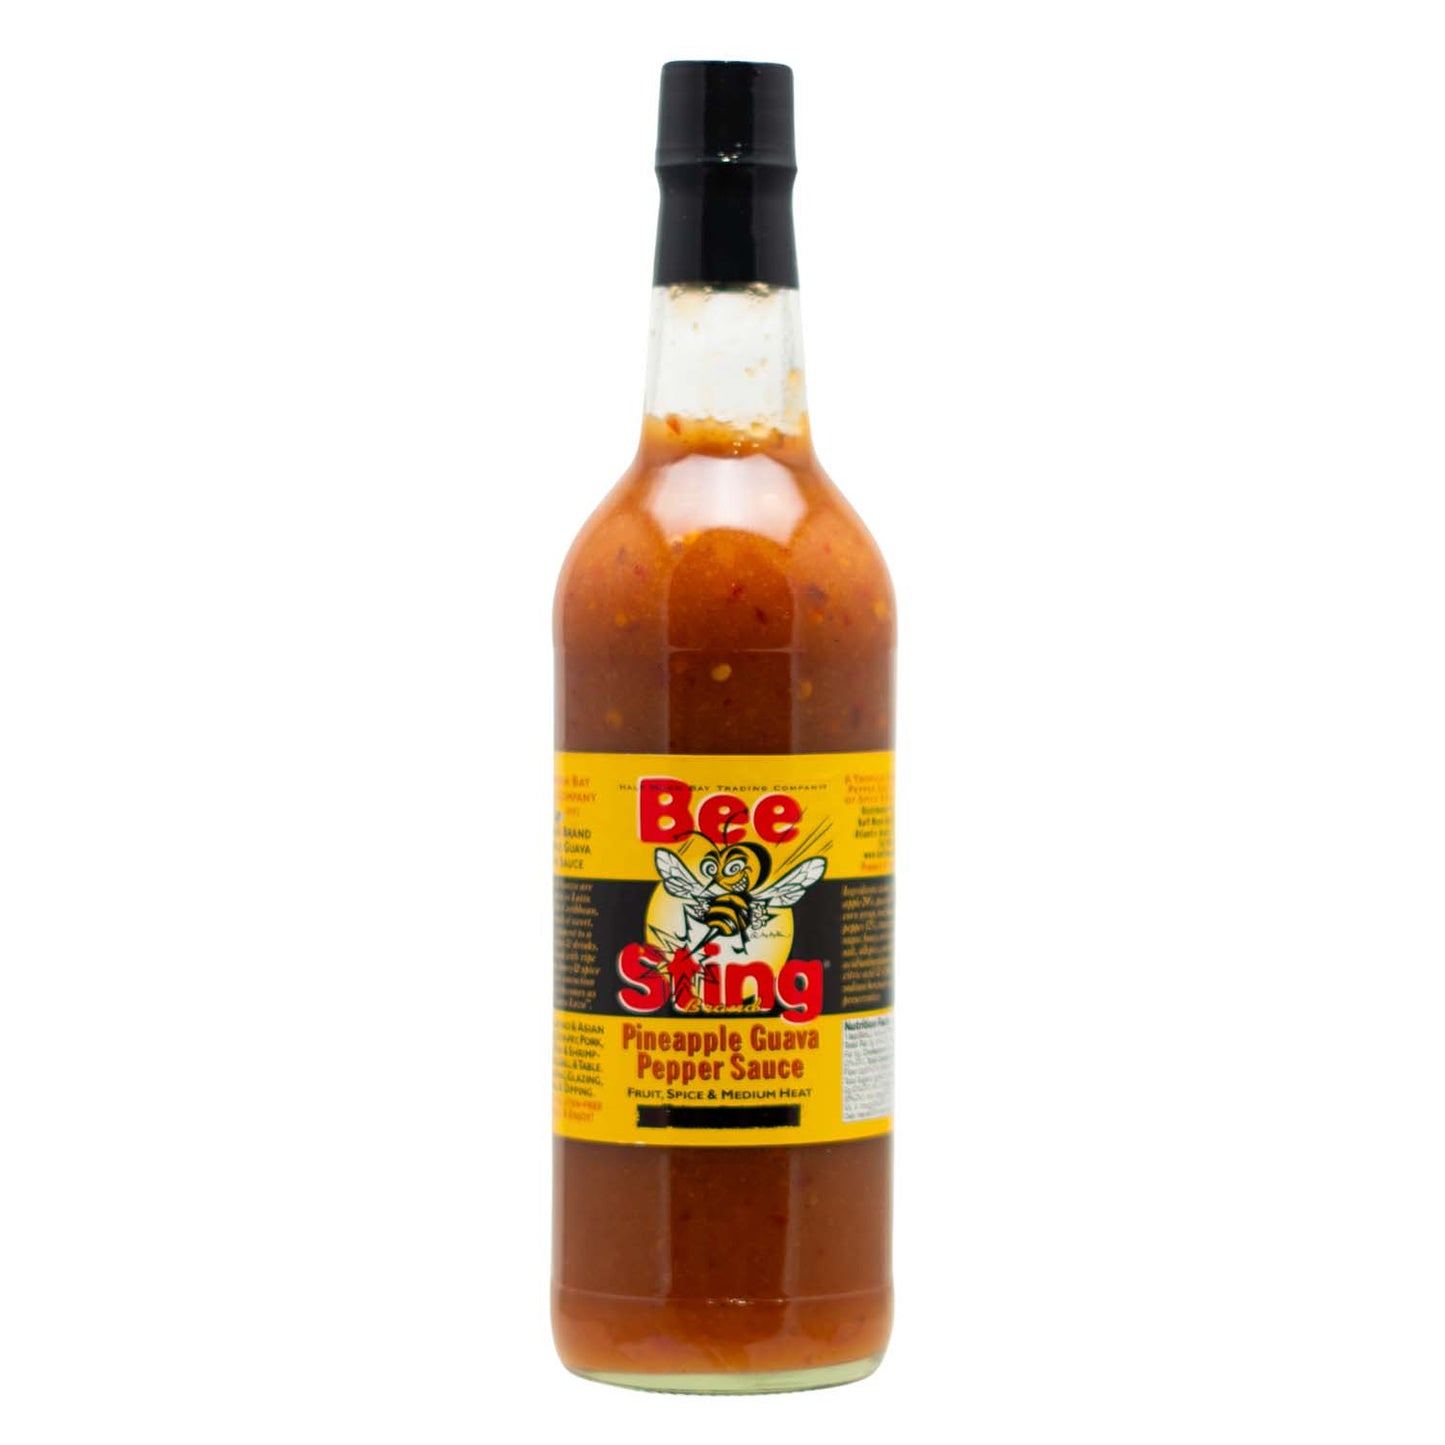 Bee Sting Pineapple Guava Hot Sauce 25.7 oz.